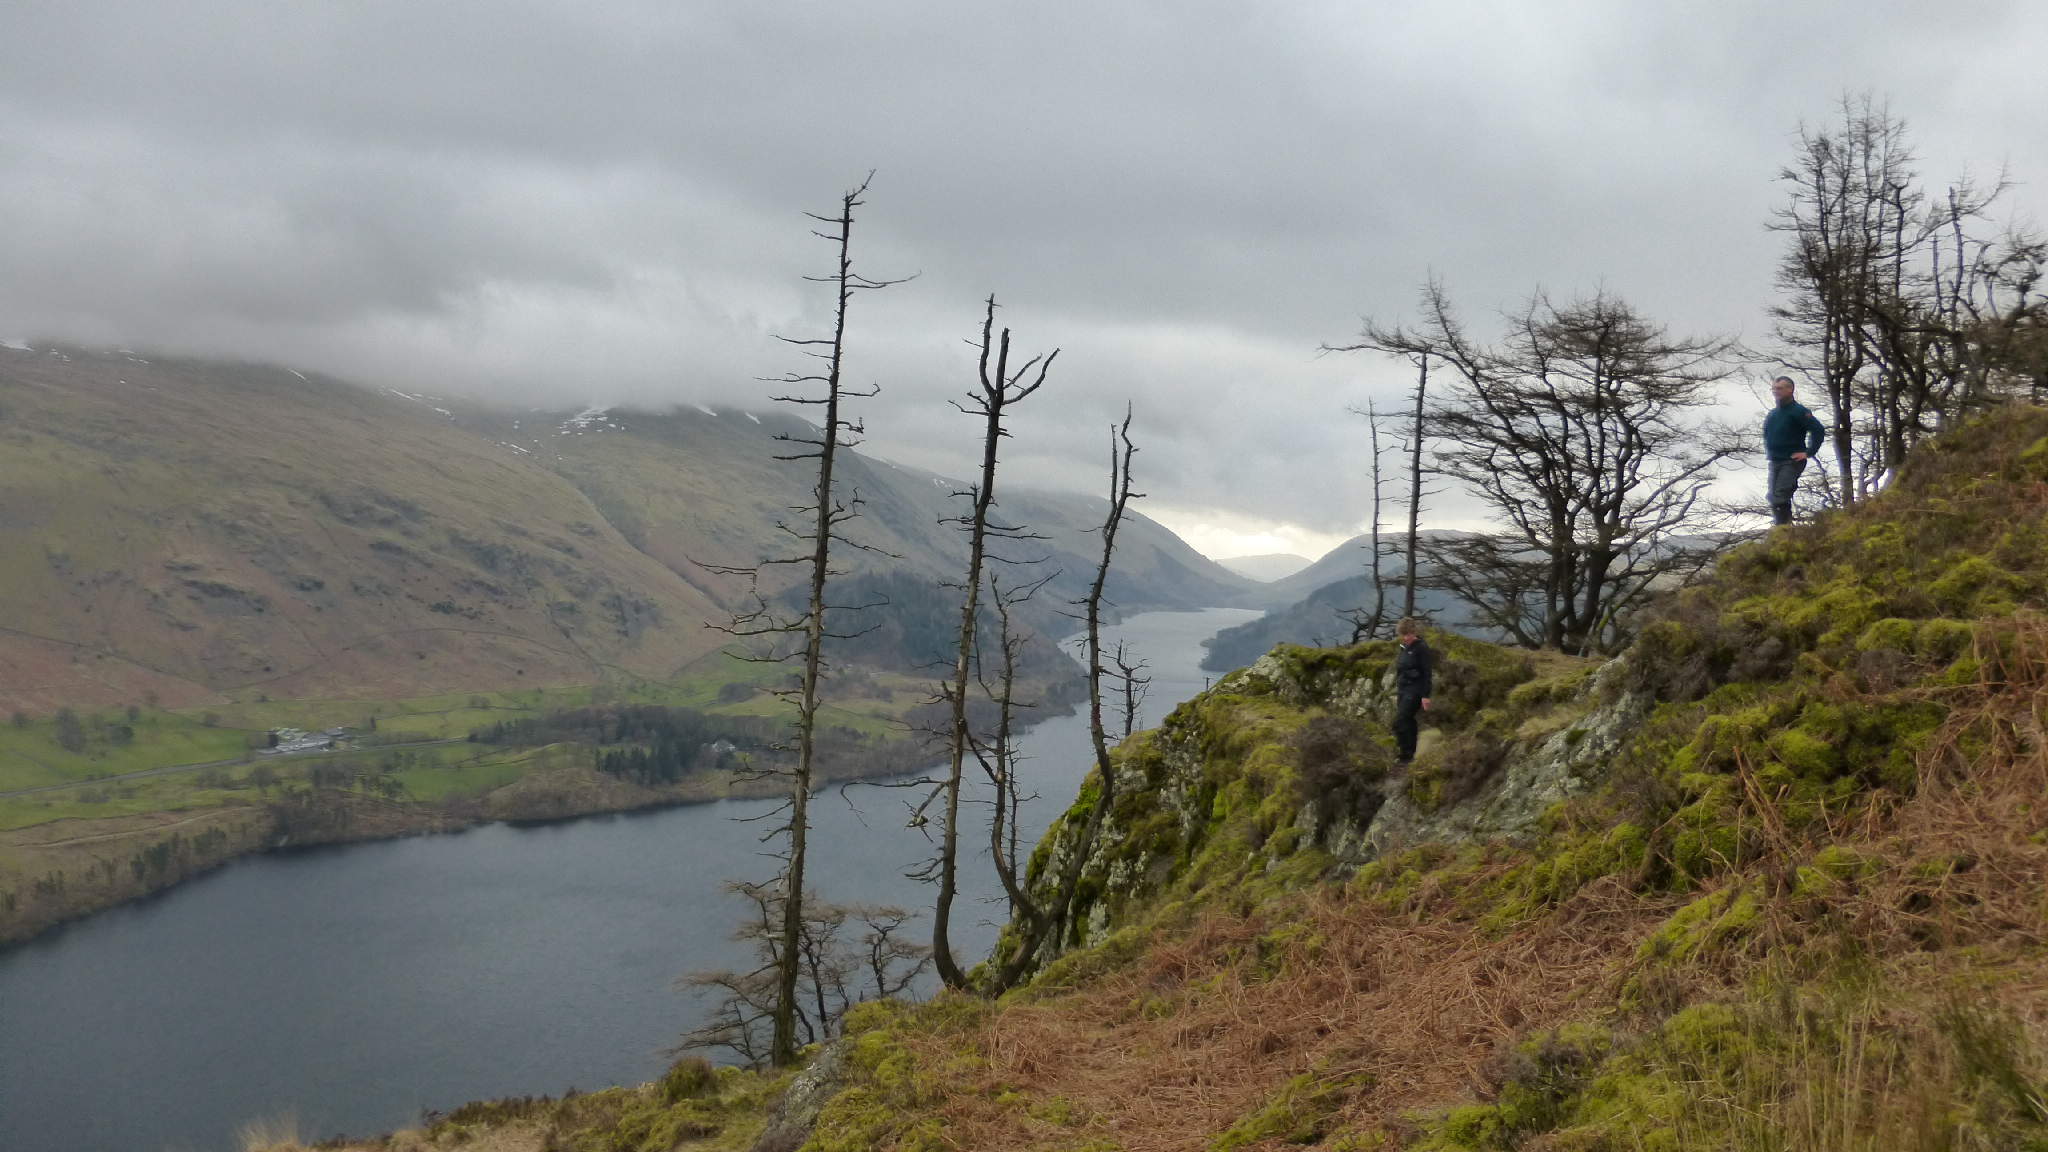 Above Thirlmere